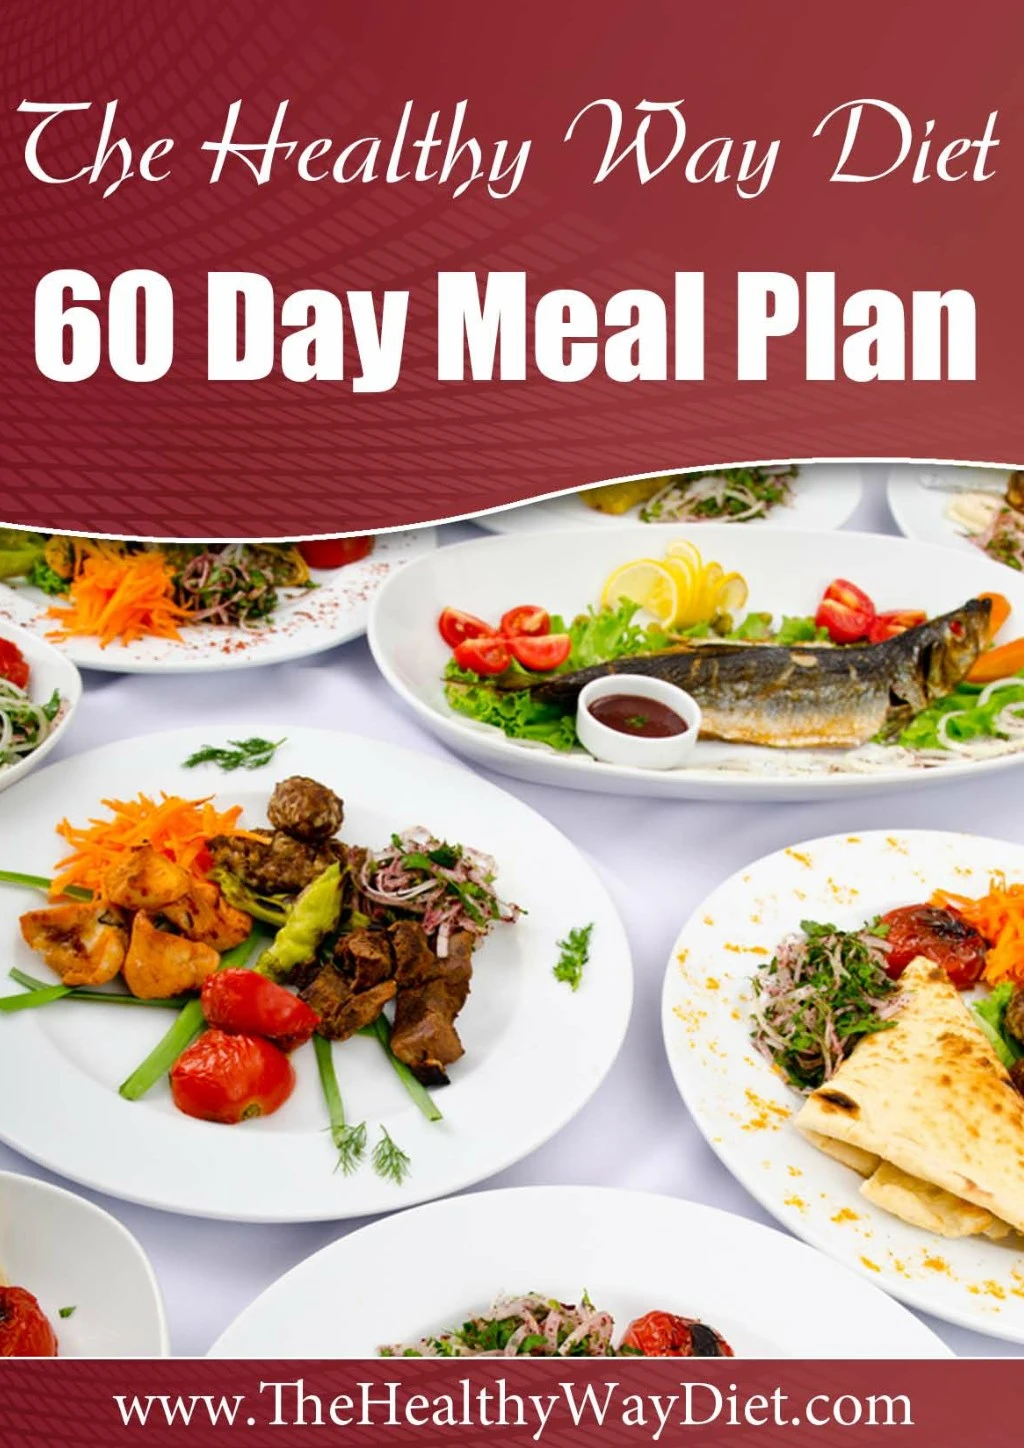 60 day meal plan for weight loss